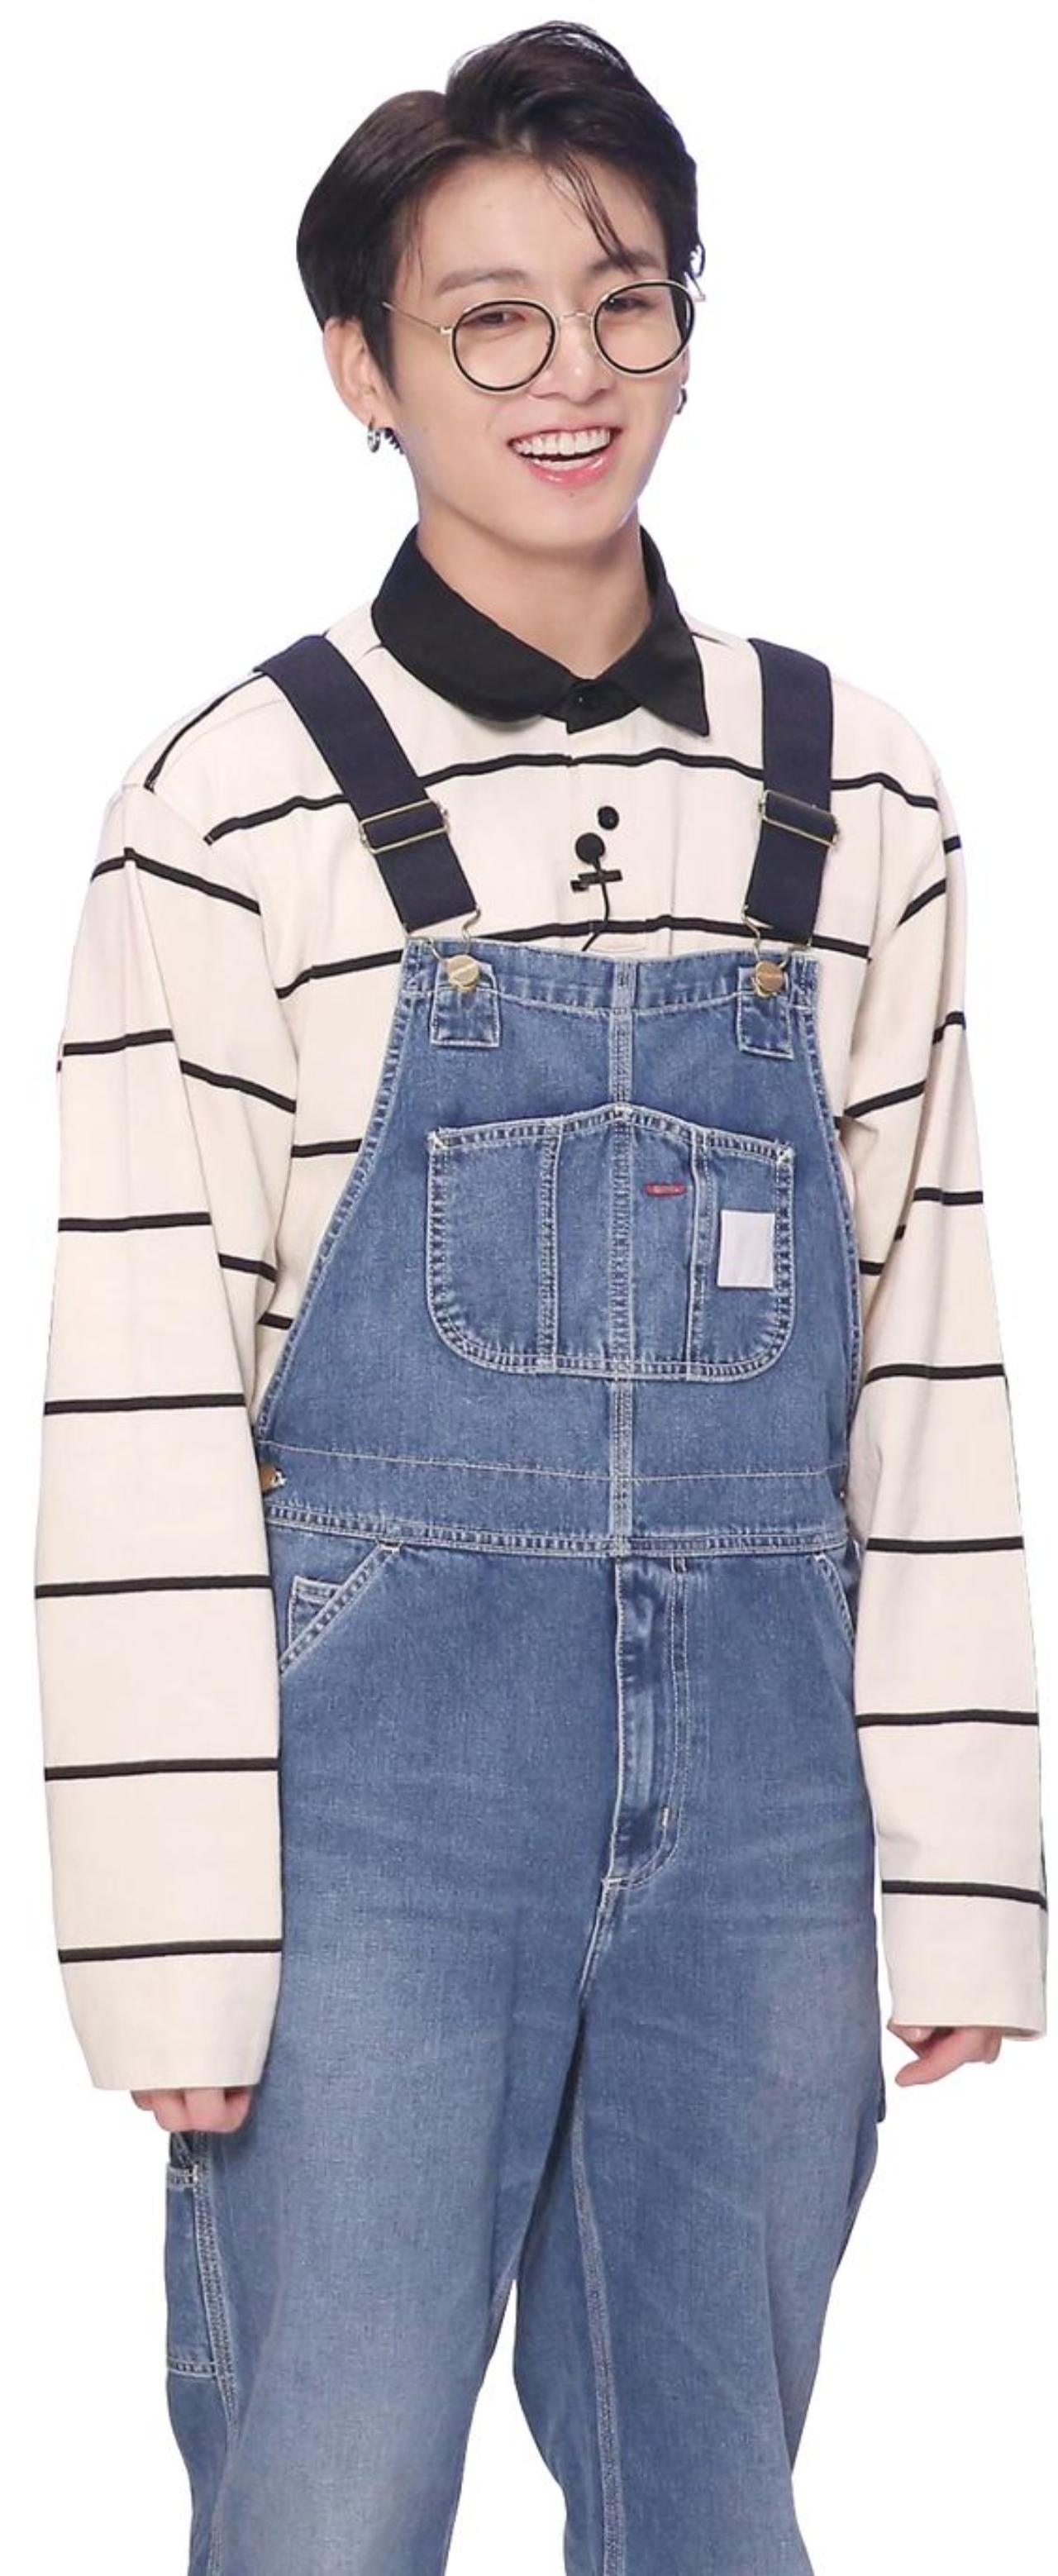 Last but not least, Jungkook sometimes gives into his cute, 'aegyo' side and indulges ARMYs with adorable outfits. Take this outfit for instance where he wears a full-sleeved striped sweatshirt and denim (of course) overalls. Look at those sweater paws!